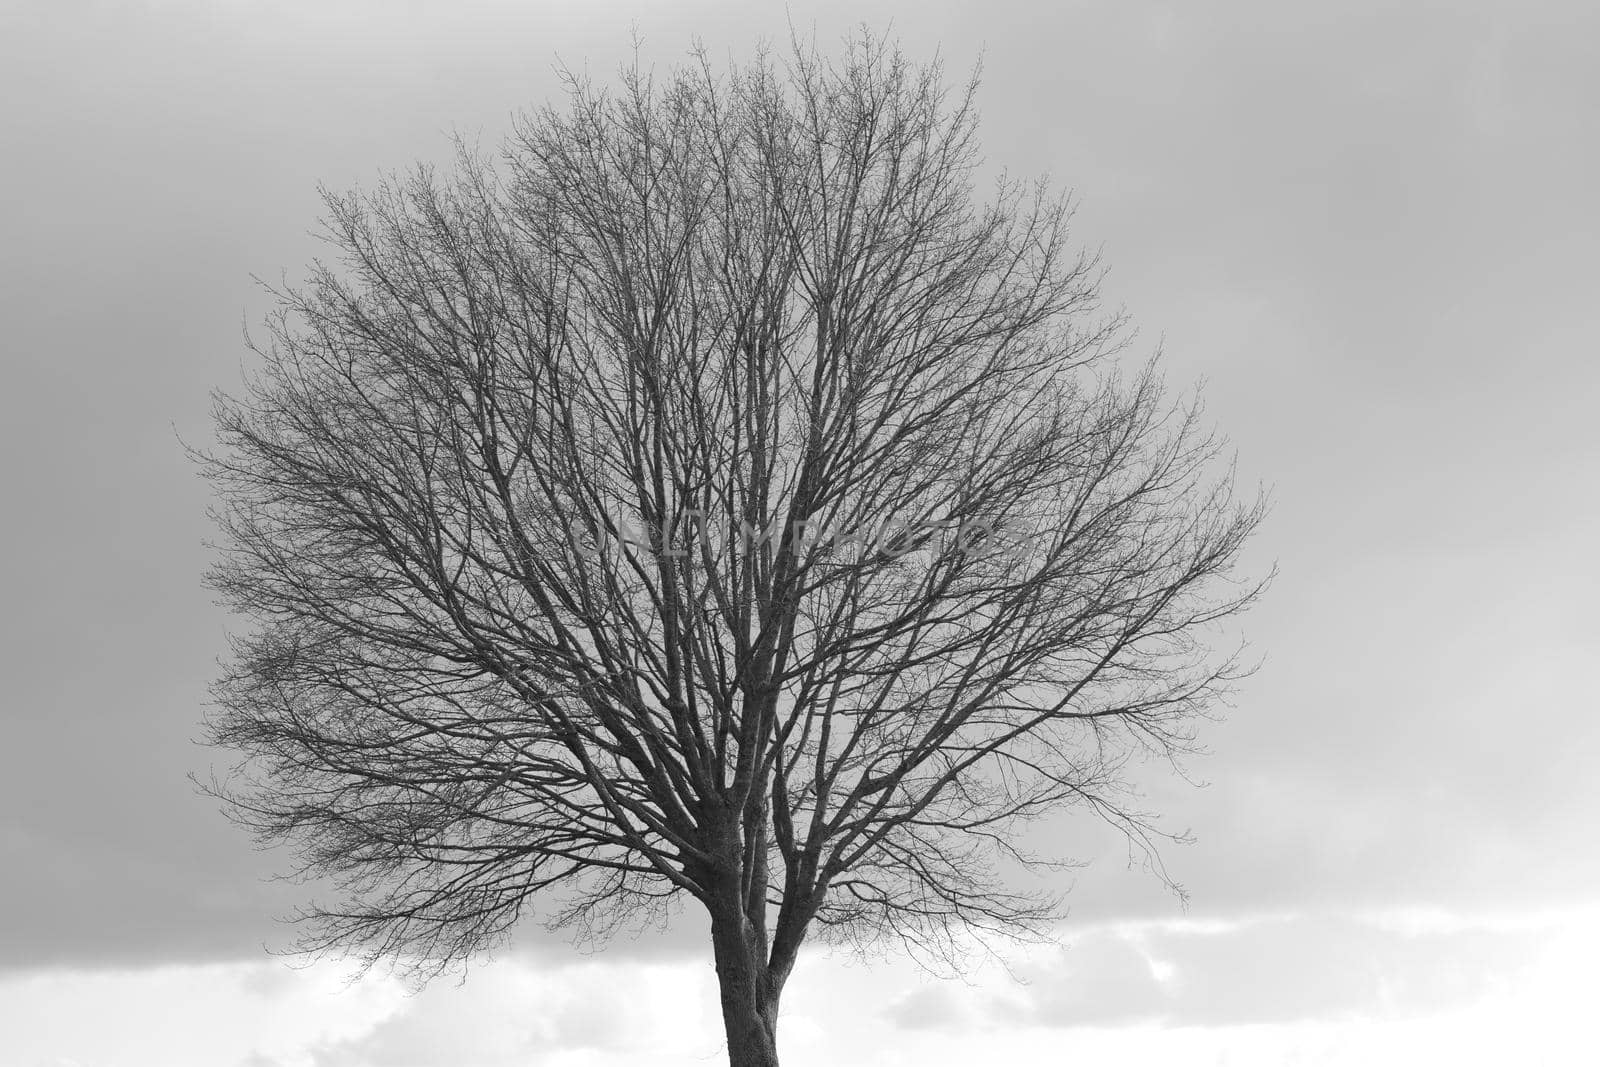 Treetop without leaves against a grey cloudy sky